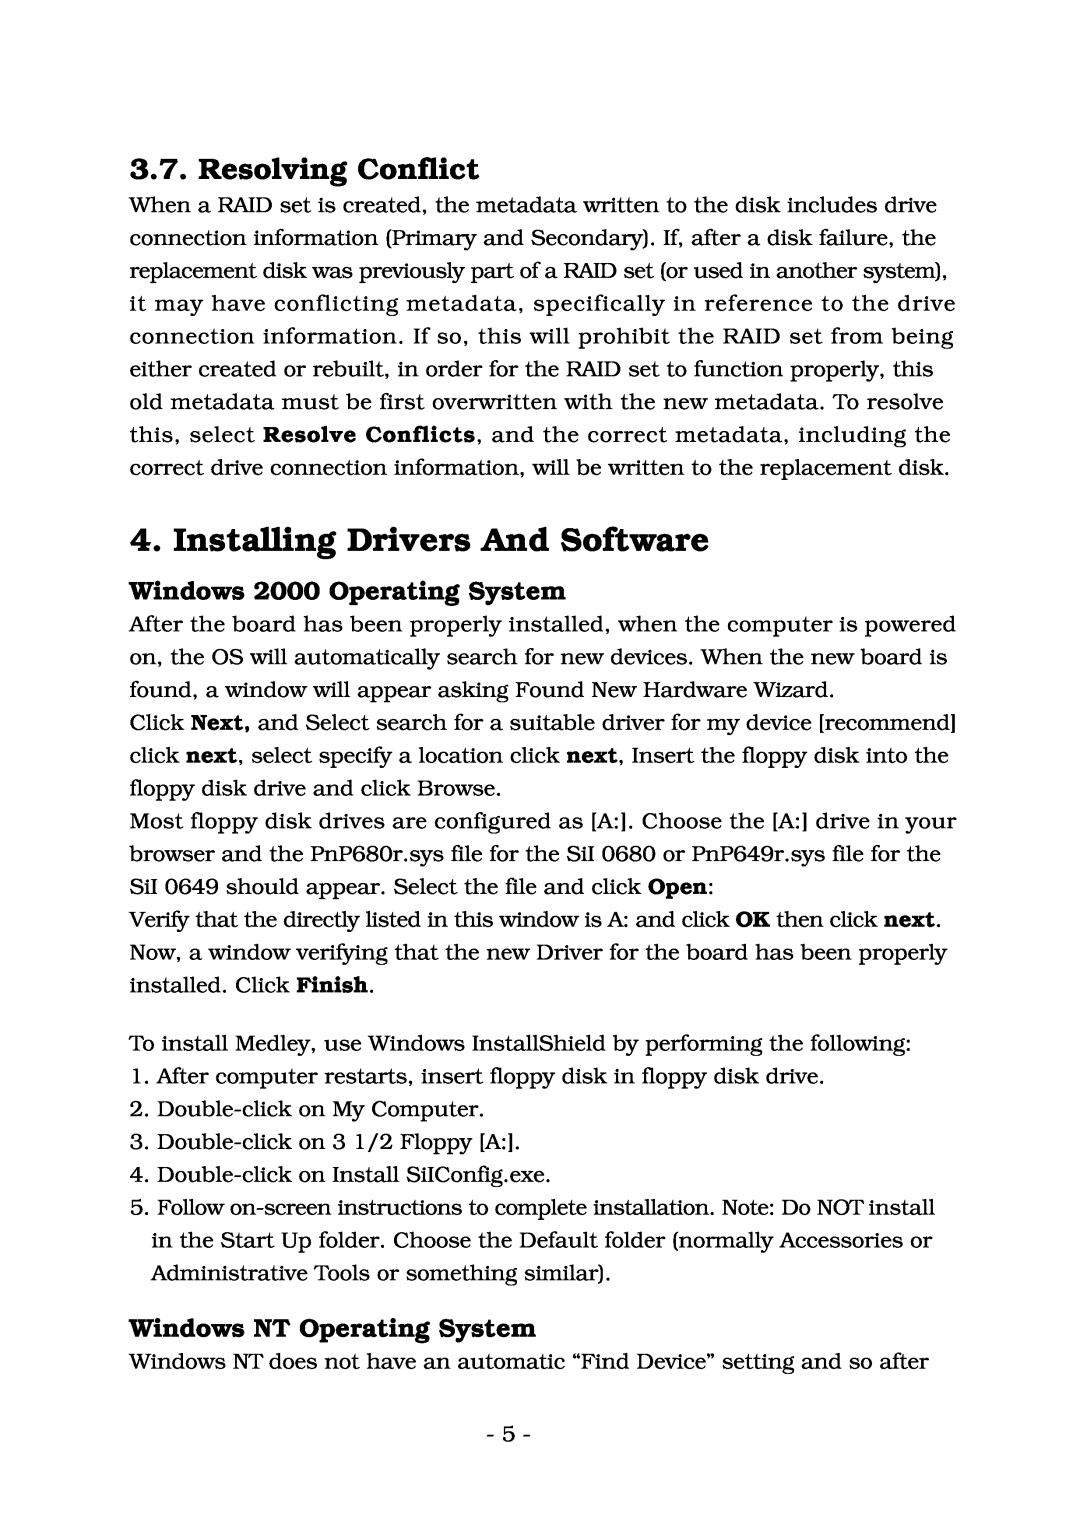 Lindy ATA-133 manual Installing Drivers And Software, Resolving Conflict, Windows 2000 Operating System 